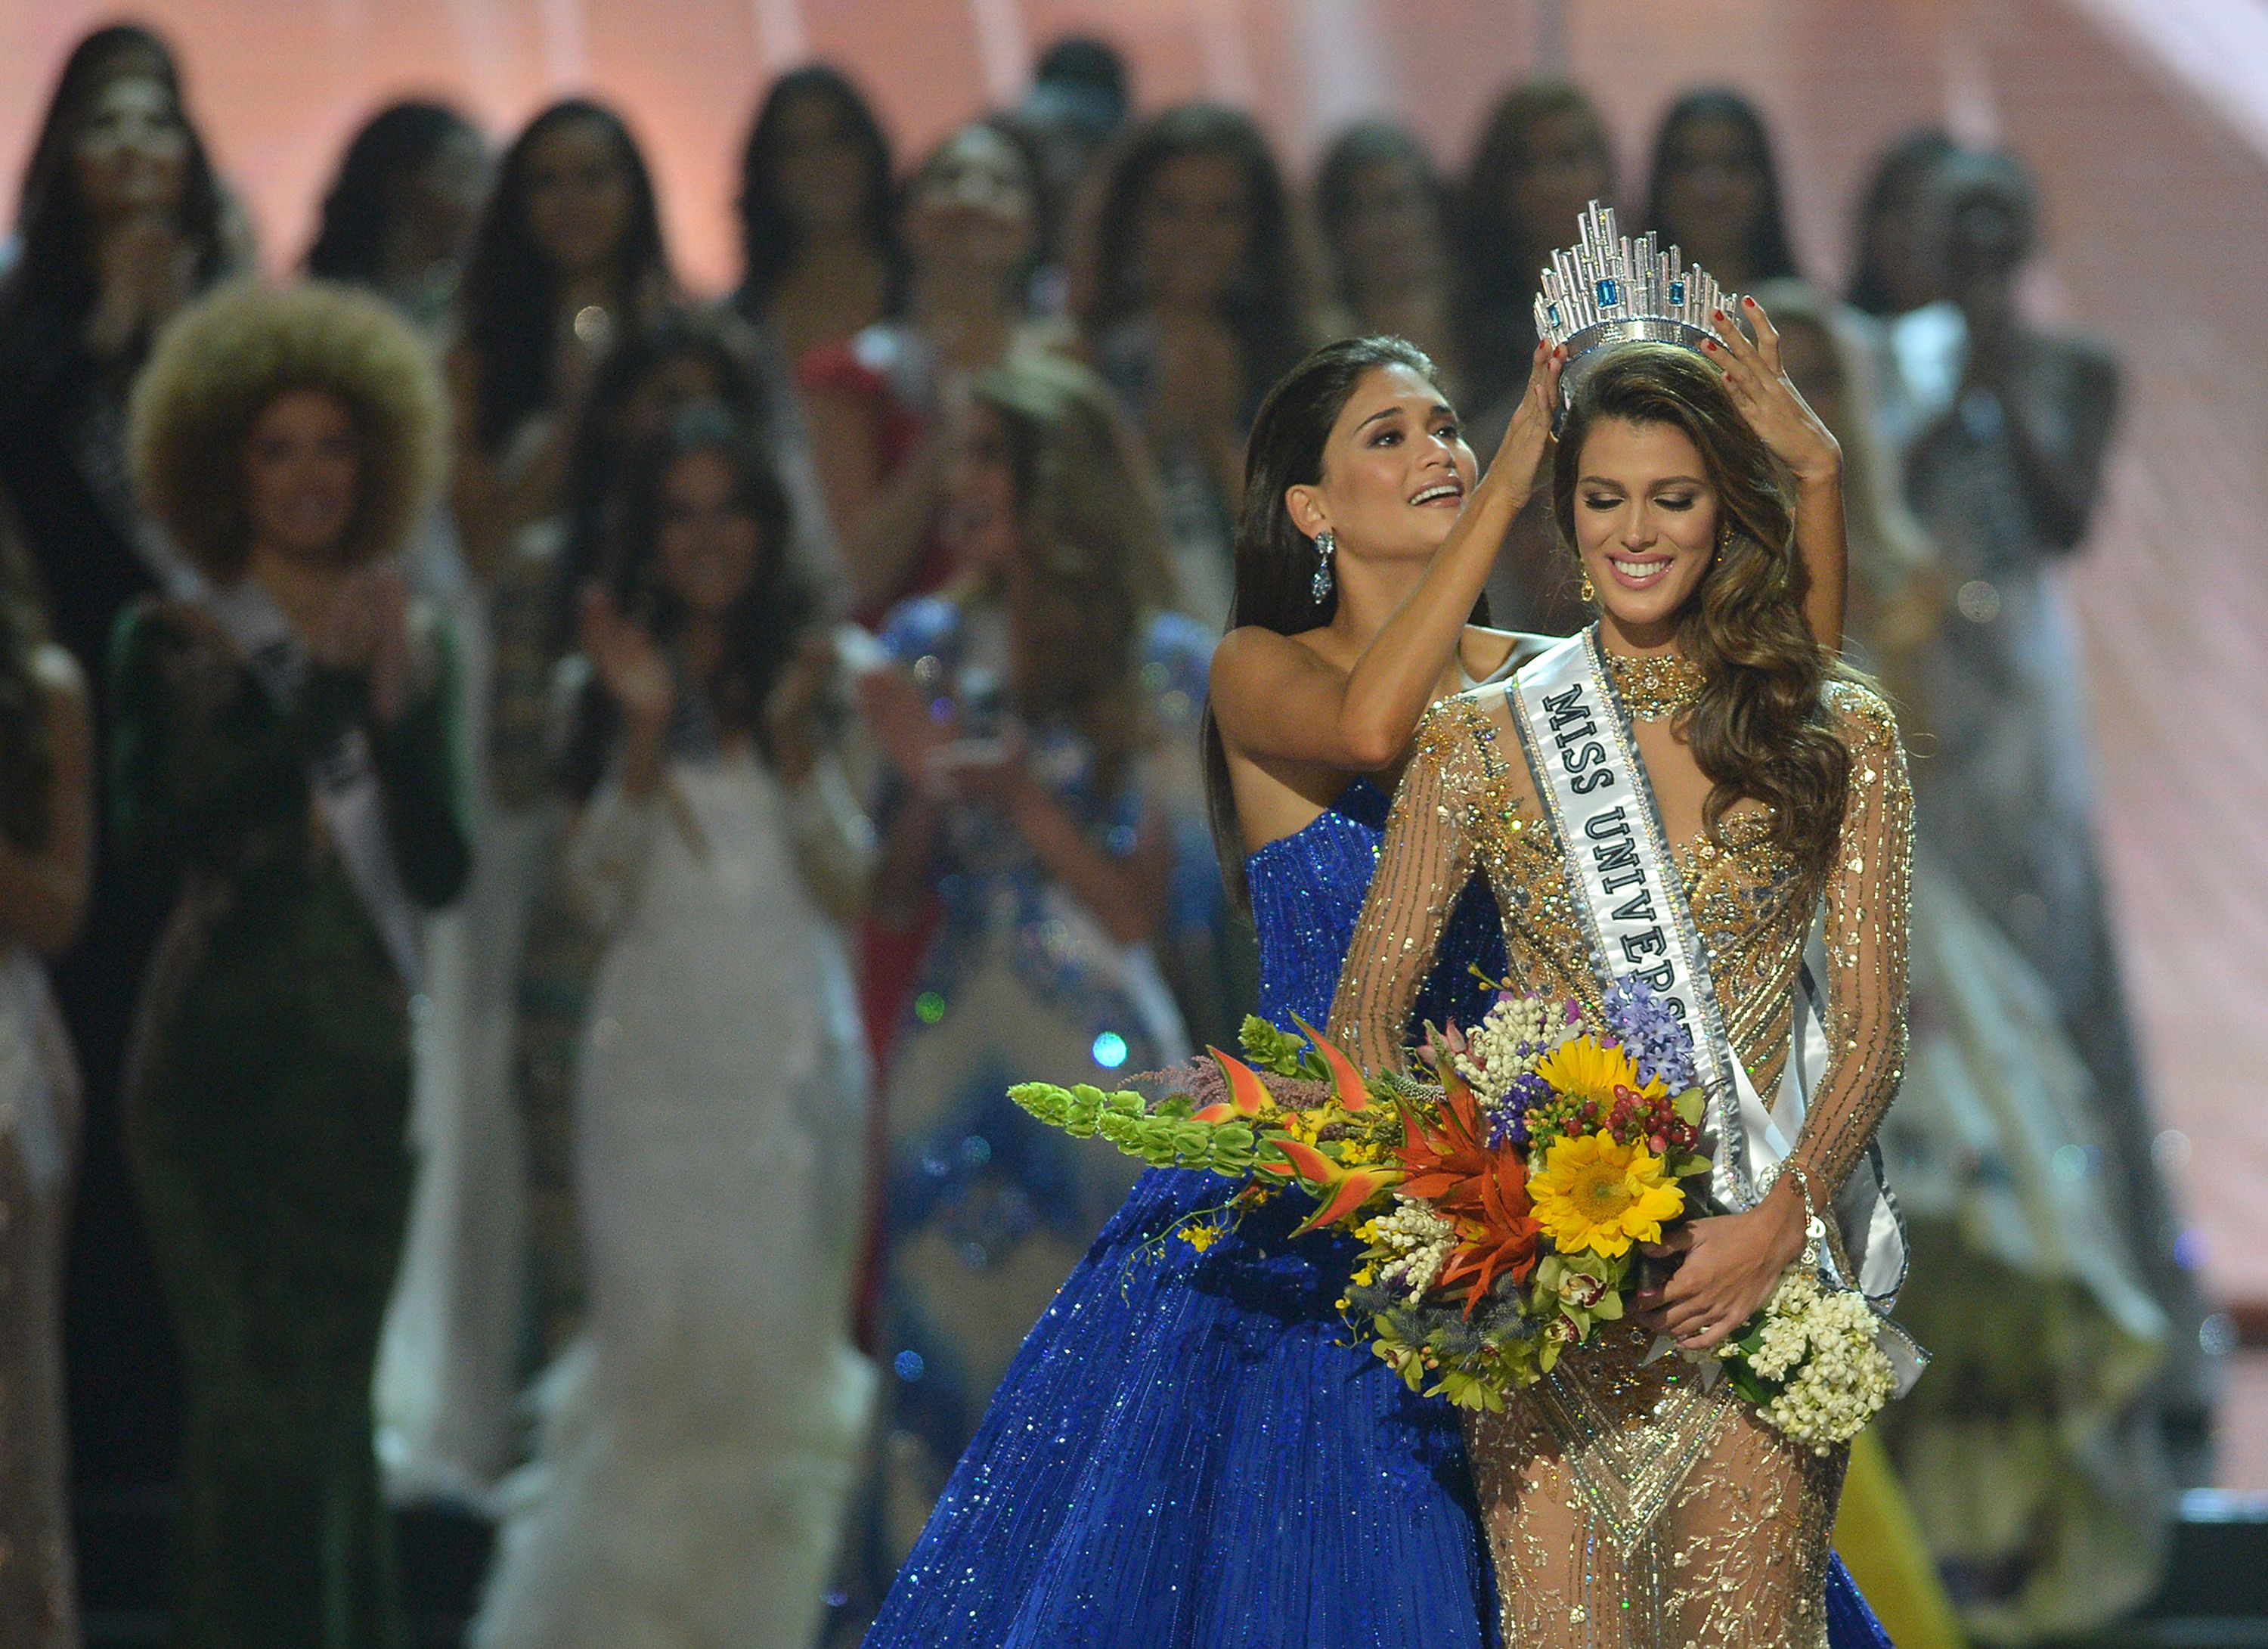 Miss Universe contestant Iris Mittenaere (R) of France is crowned the new 2017 winner by former Miss Universe Pia Wurtzbach of the Philippines (C) during the Miss Universe pageant at the Mall of Asia Arena in Manila on January 30, 2017. France was crowed Miss Universe on January 30 in a glitzy spectacle free of last year's dramatic mix-up but with a dash of political controversy as finalists touched on migration and other hot-button global issues. / AFP PHOTO / TED ALJIBE